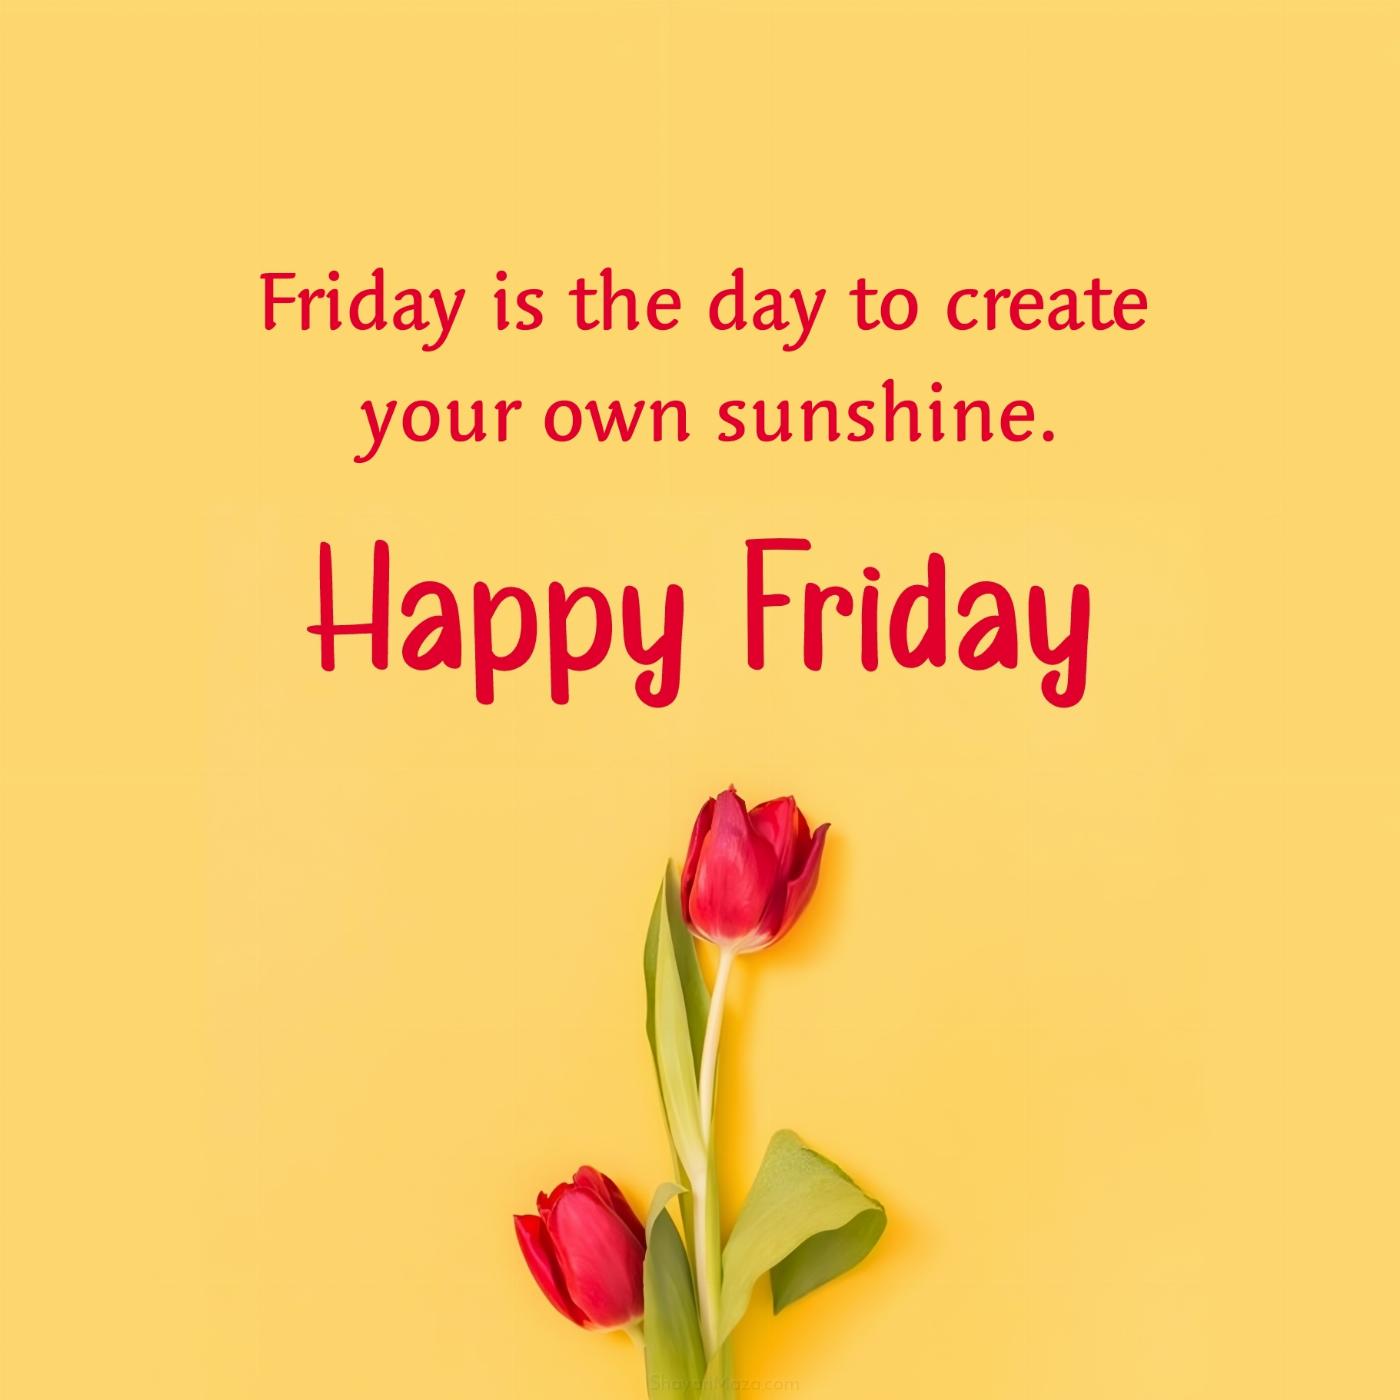 Friday is the day to create your own sunshine